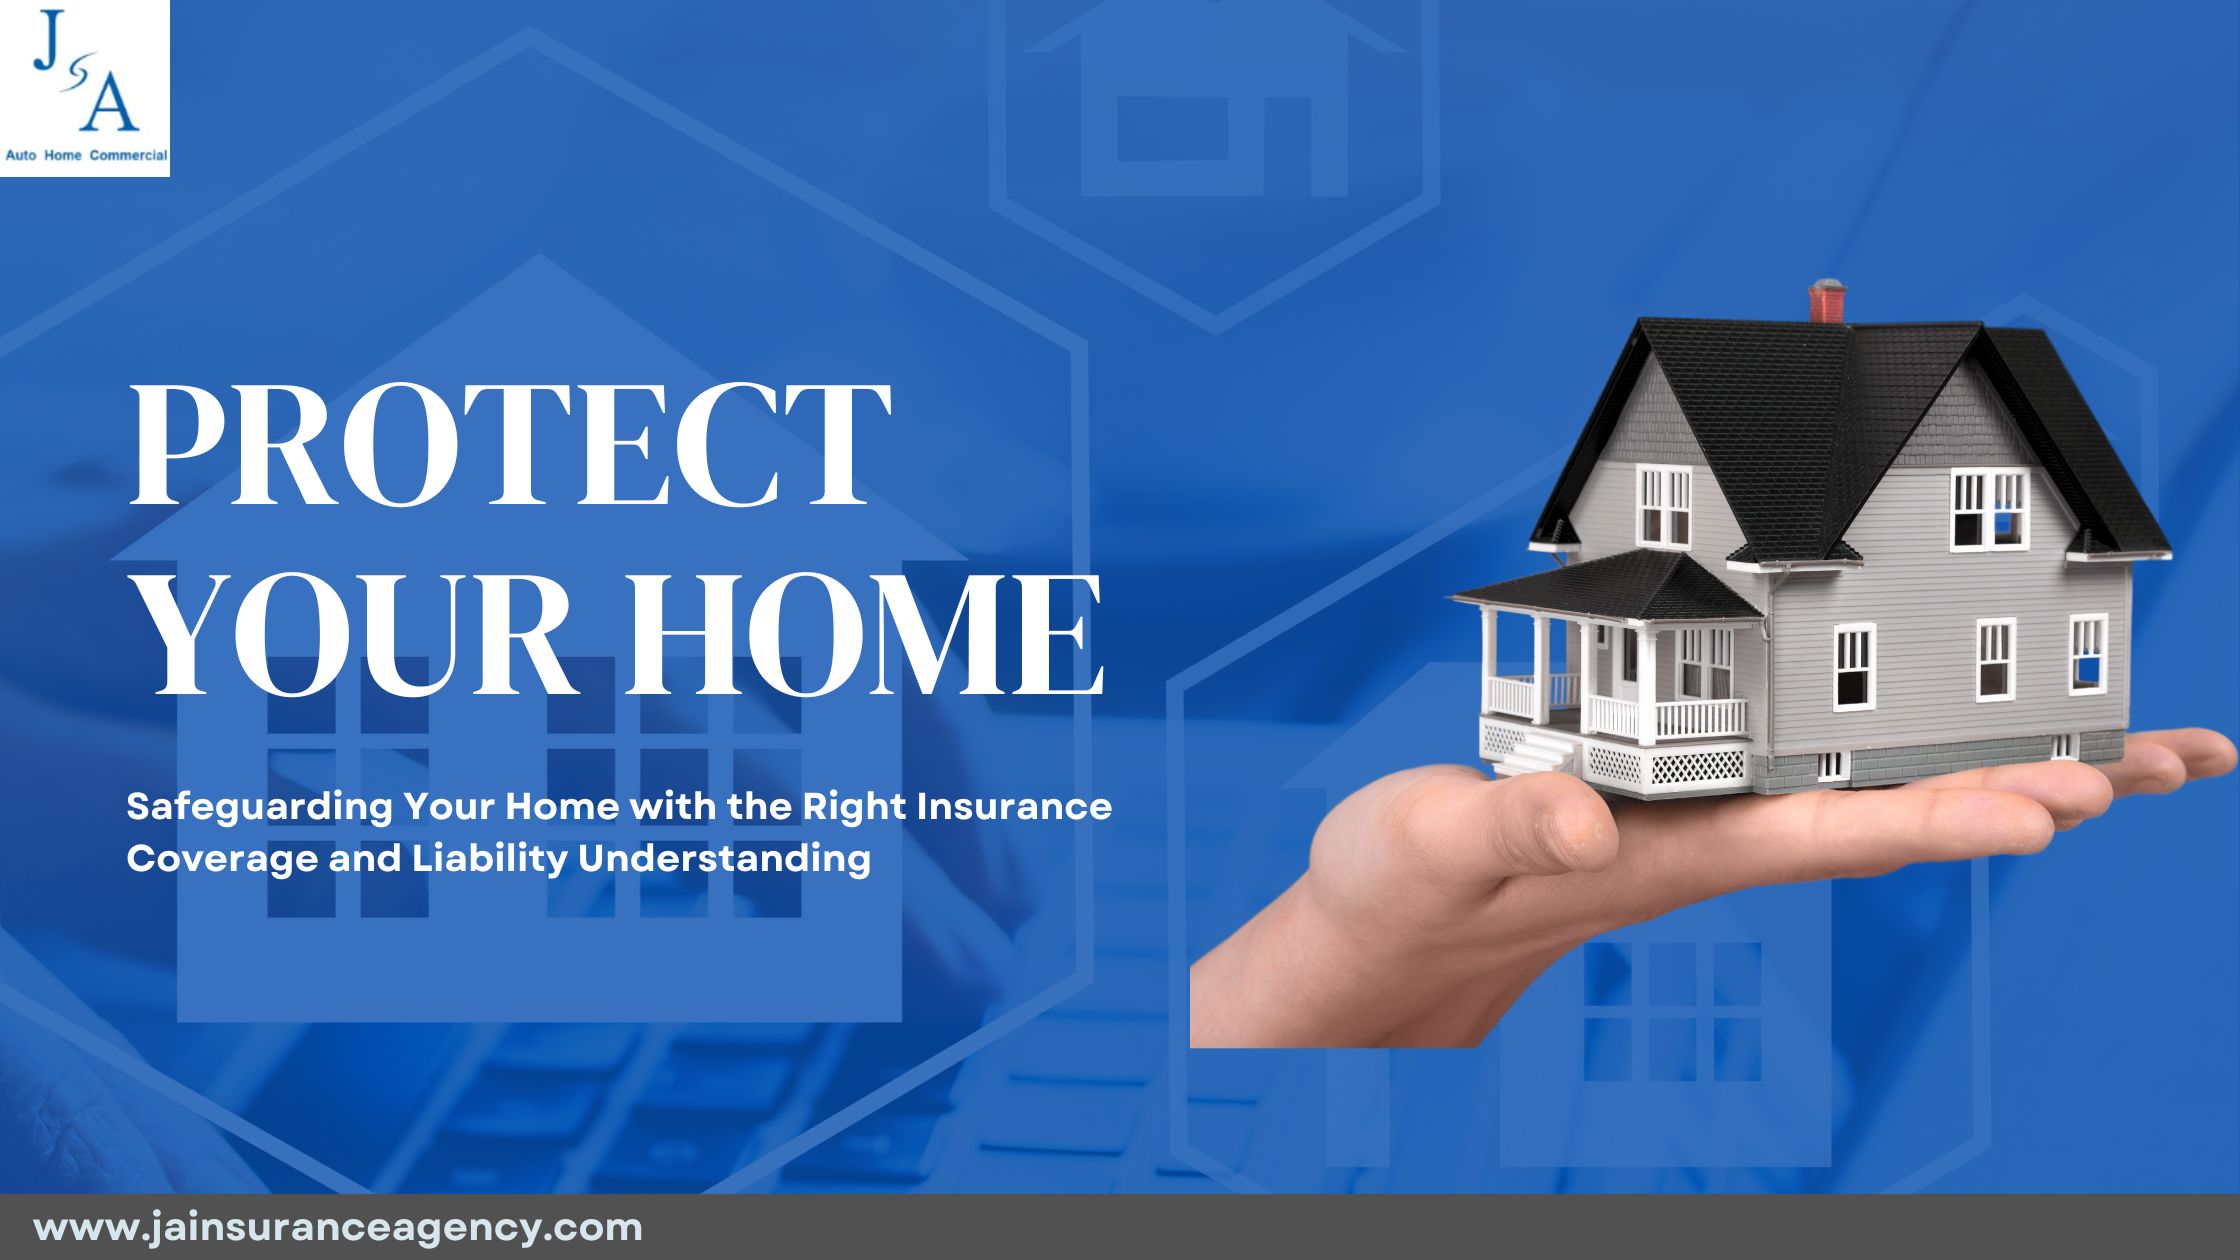 Protect your home by safeguarding it with right house insurance in georgia